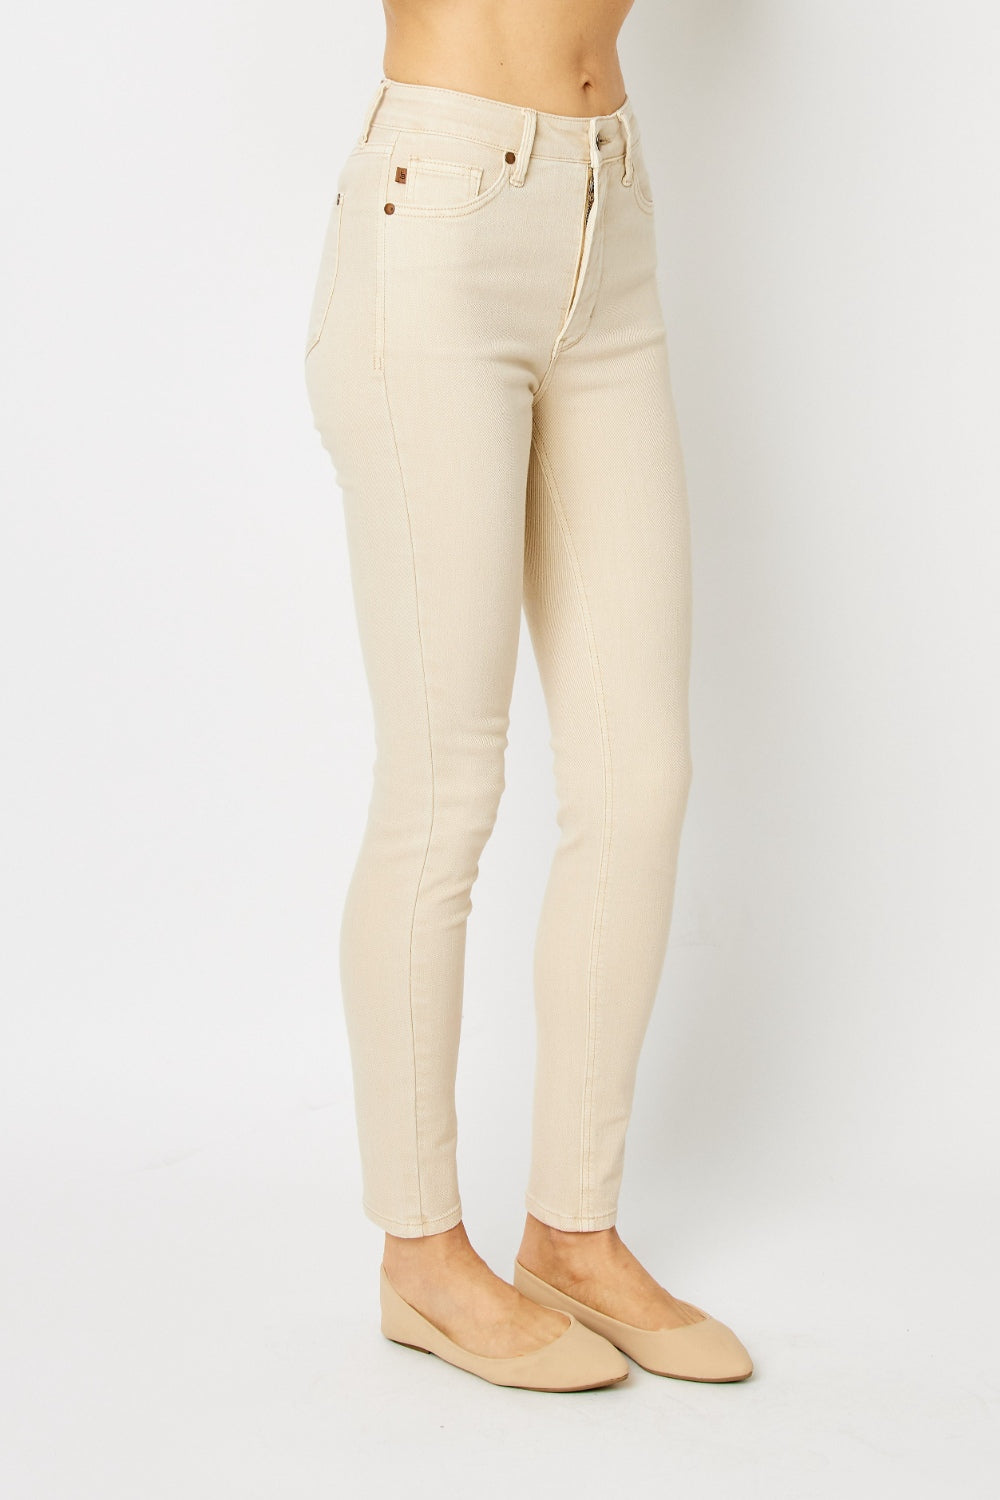 Introducing our new Garment Dyed Tummy Control Skinny Jeans. These jeans are designed to give you an effortlessly slim and flattering look. With their high-rise waist and tummy control panel, they provide the perfect amount of support and comfort.  1 - 22W